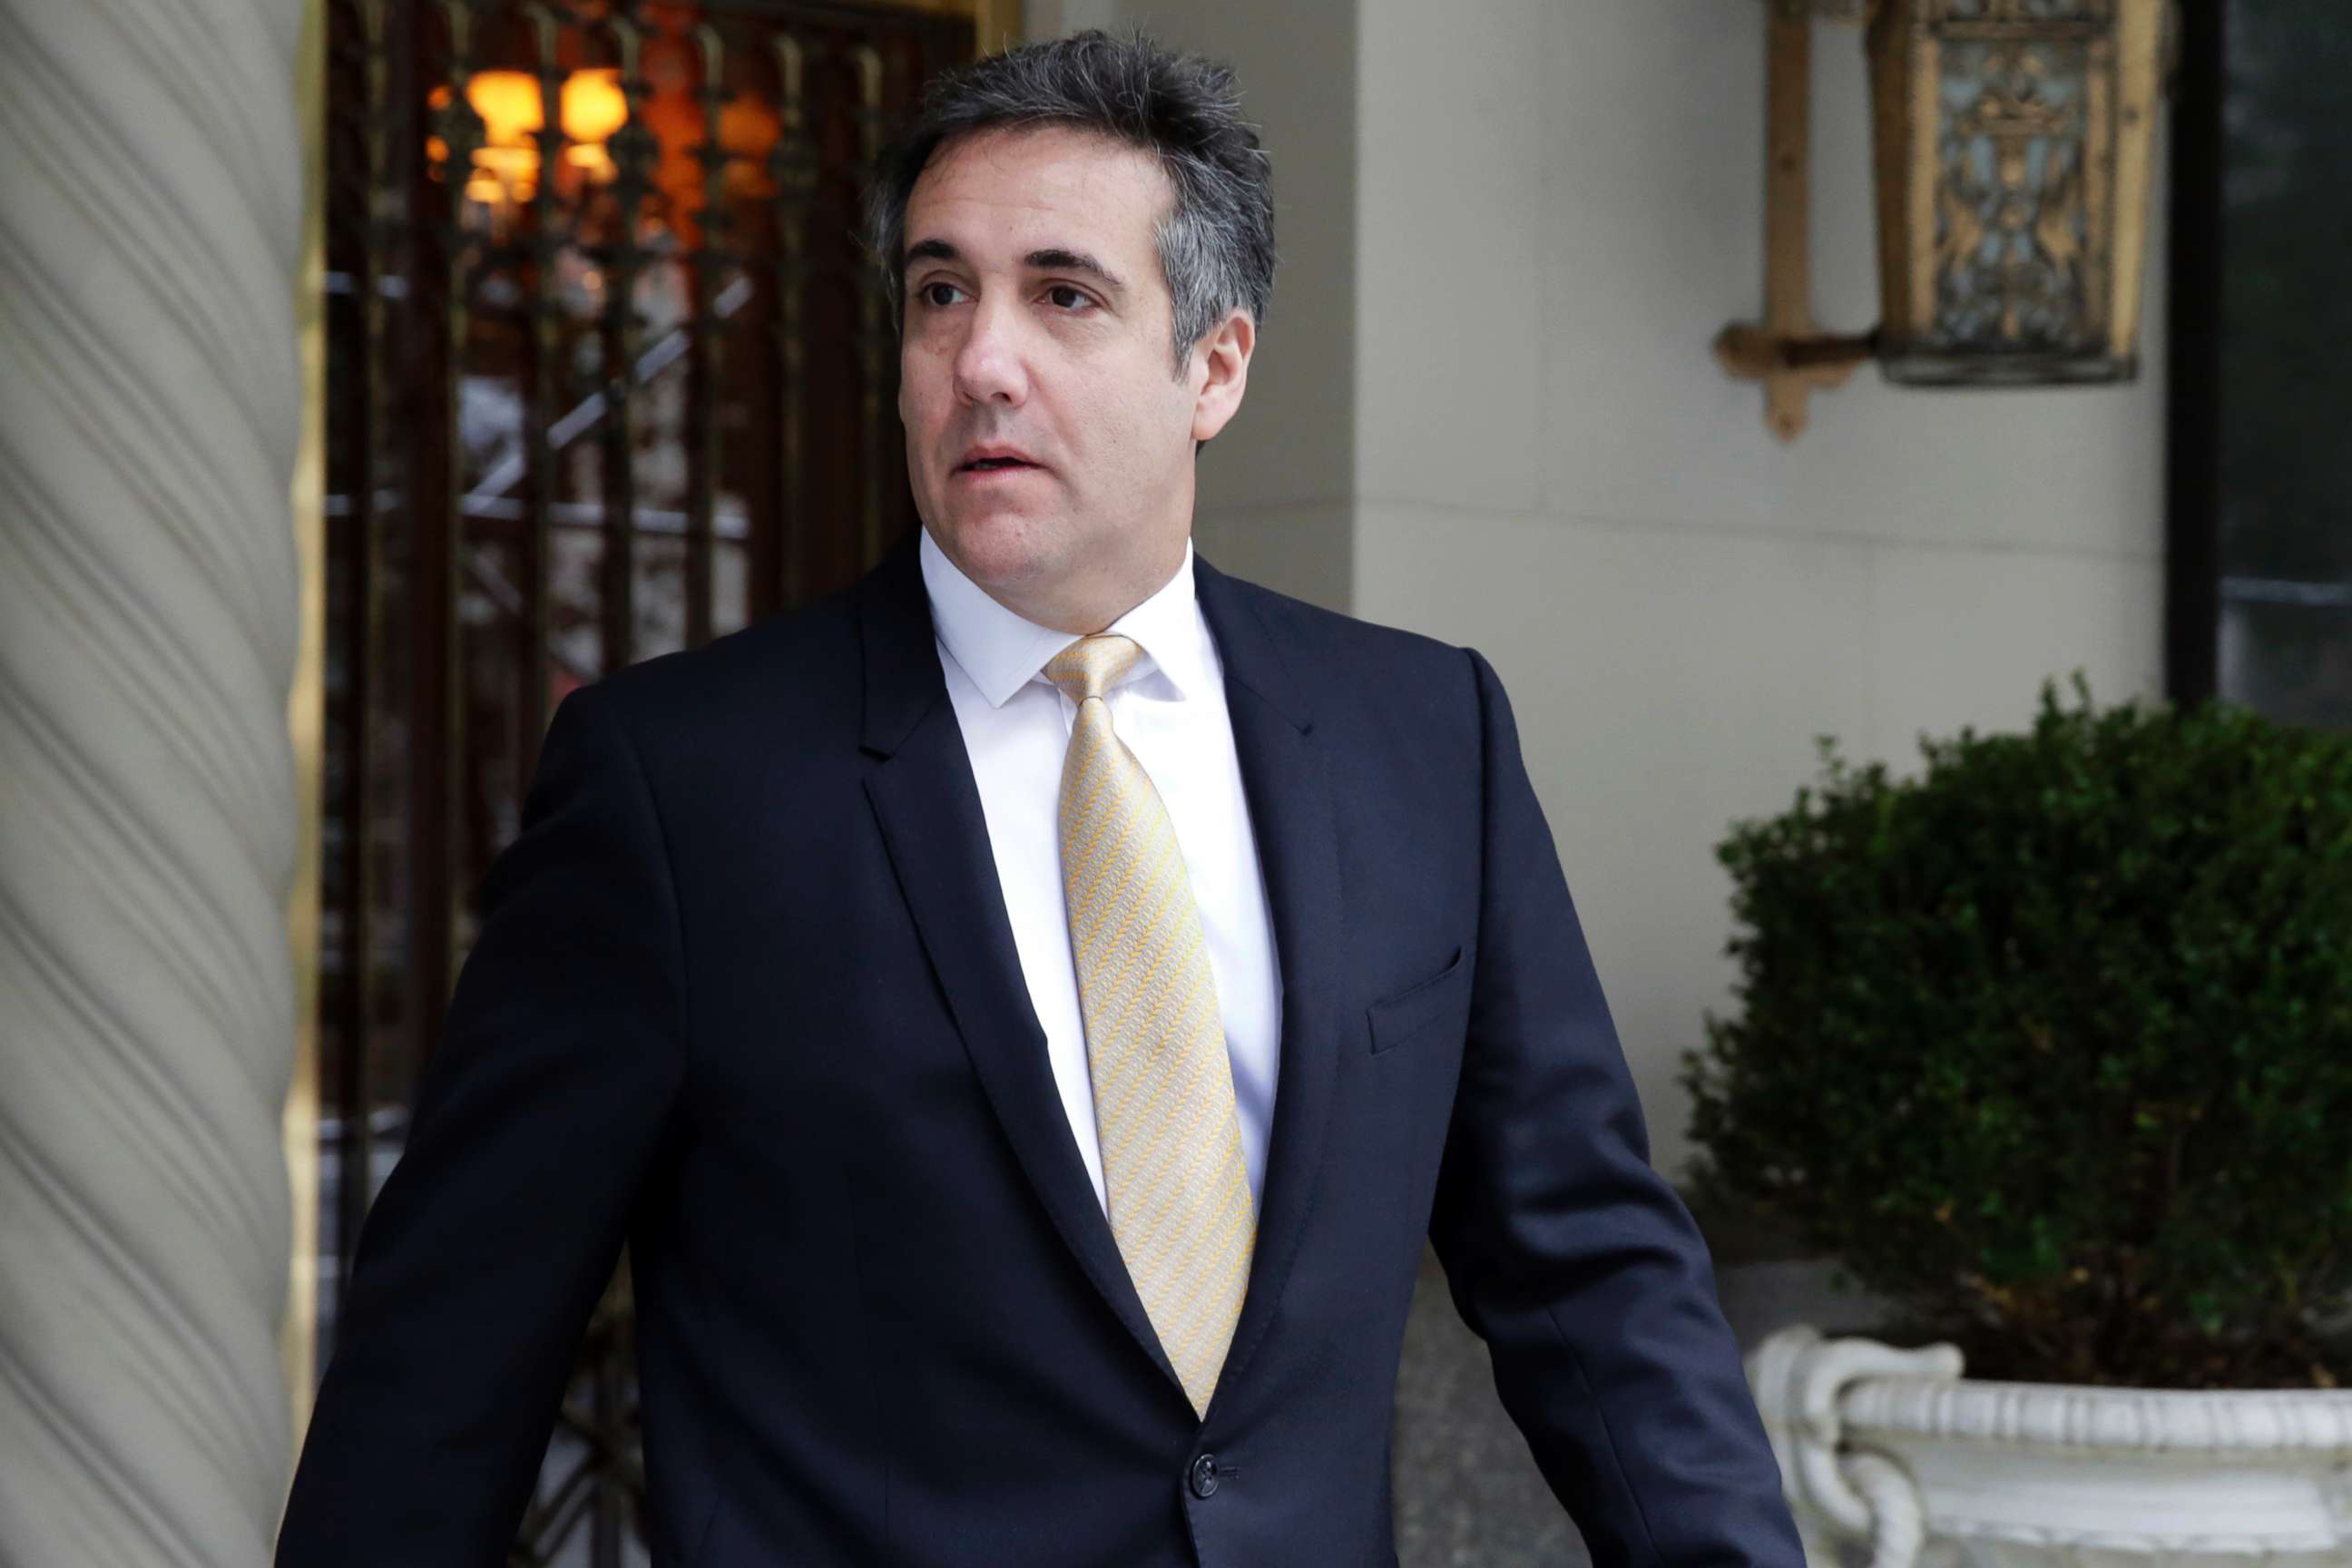 PHOTO: Michael Cohen, former personal lawyer to President Donald Trump, leaves his apartment building, in New York, Aug. 21, 2018.